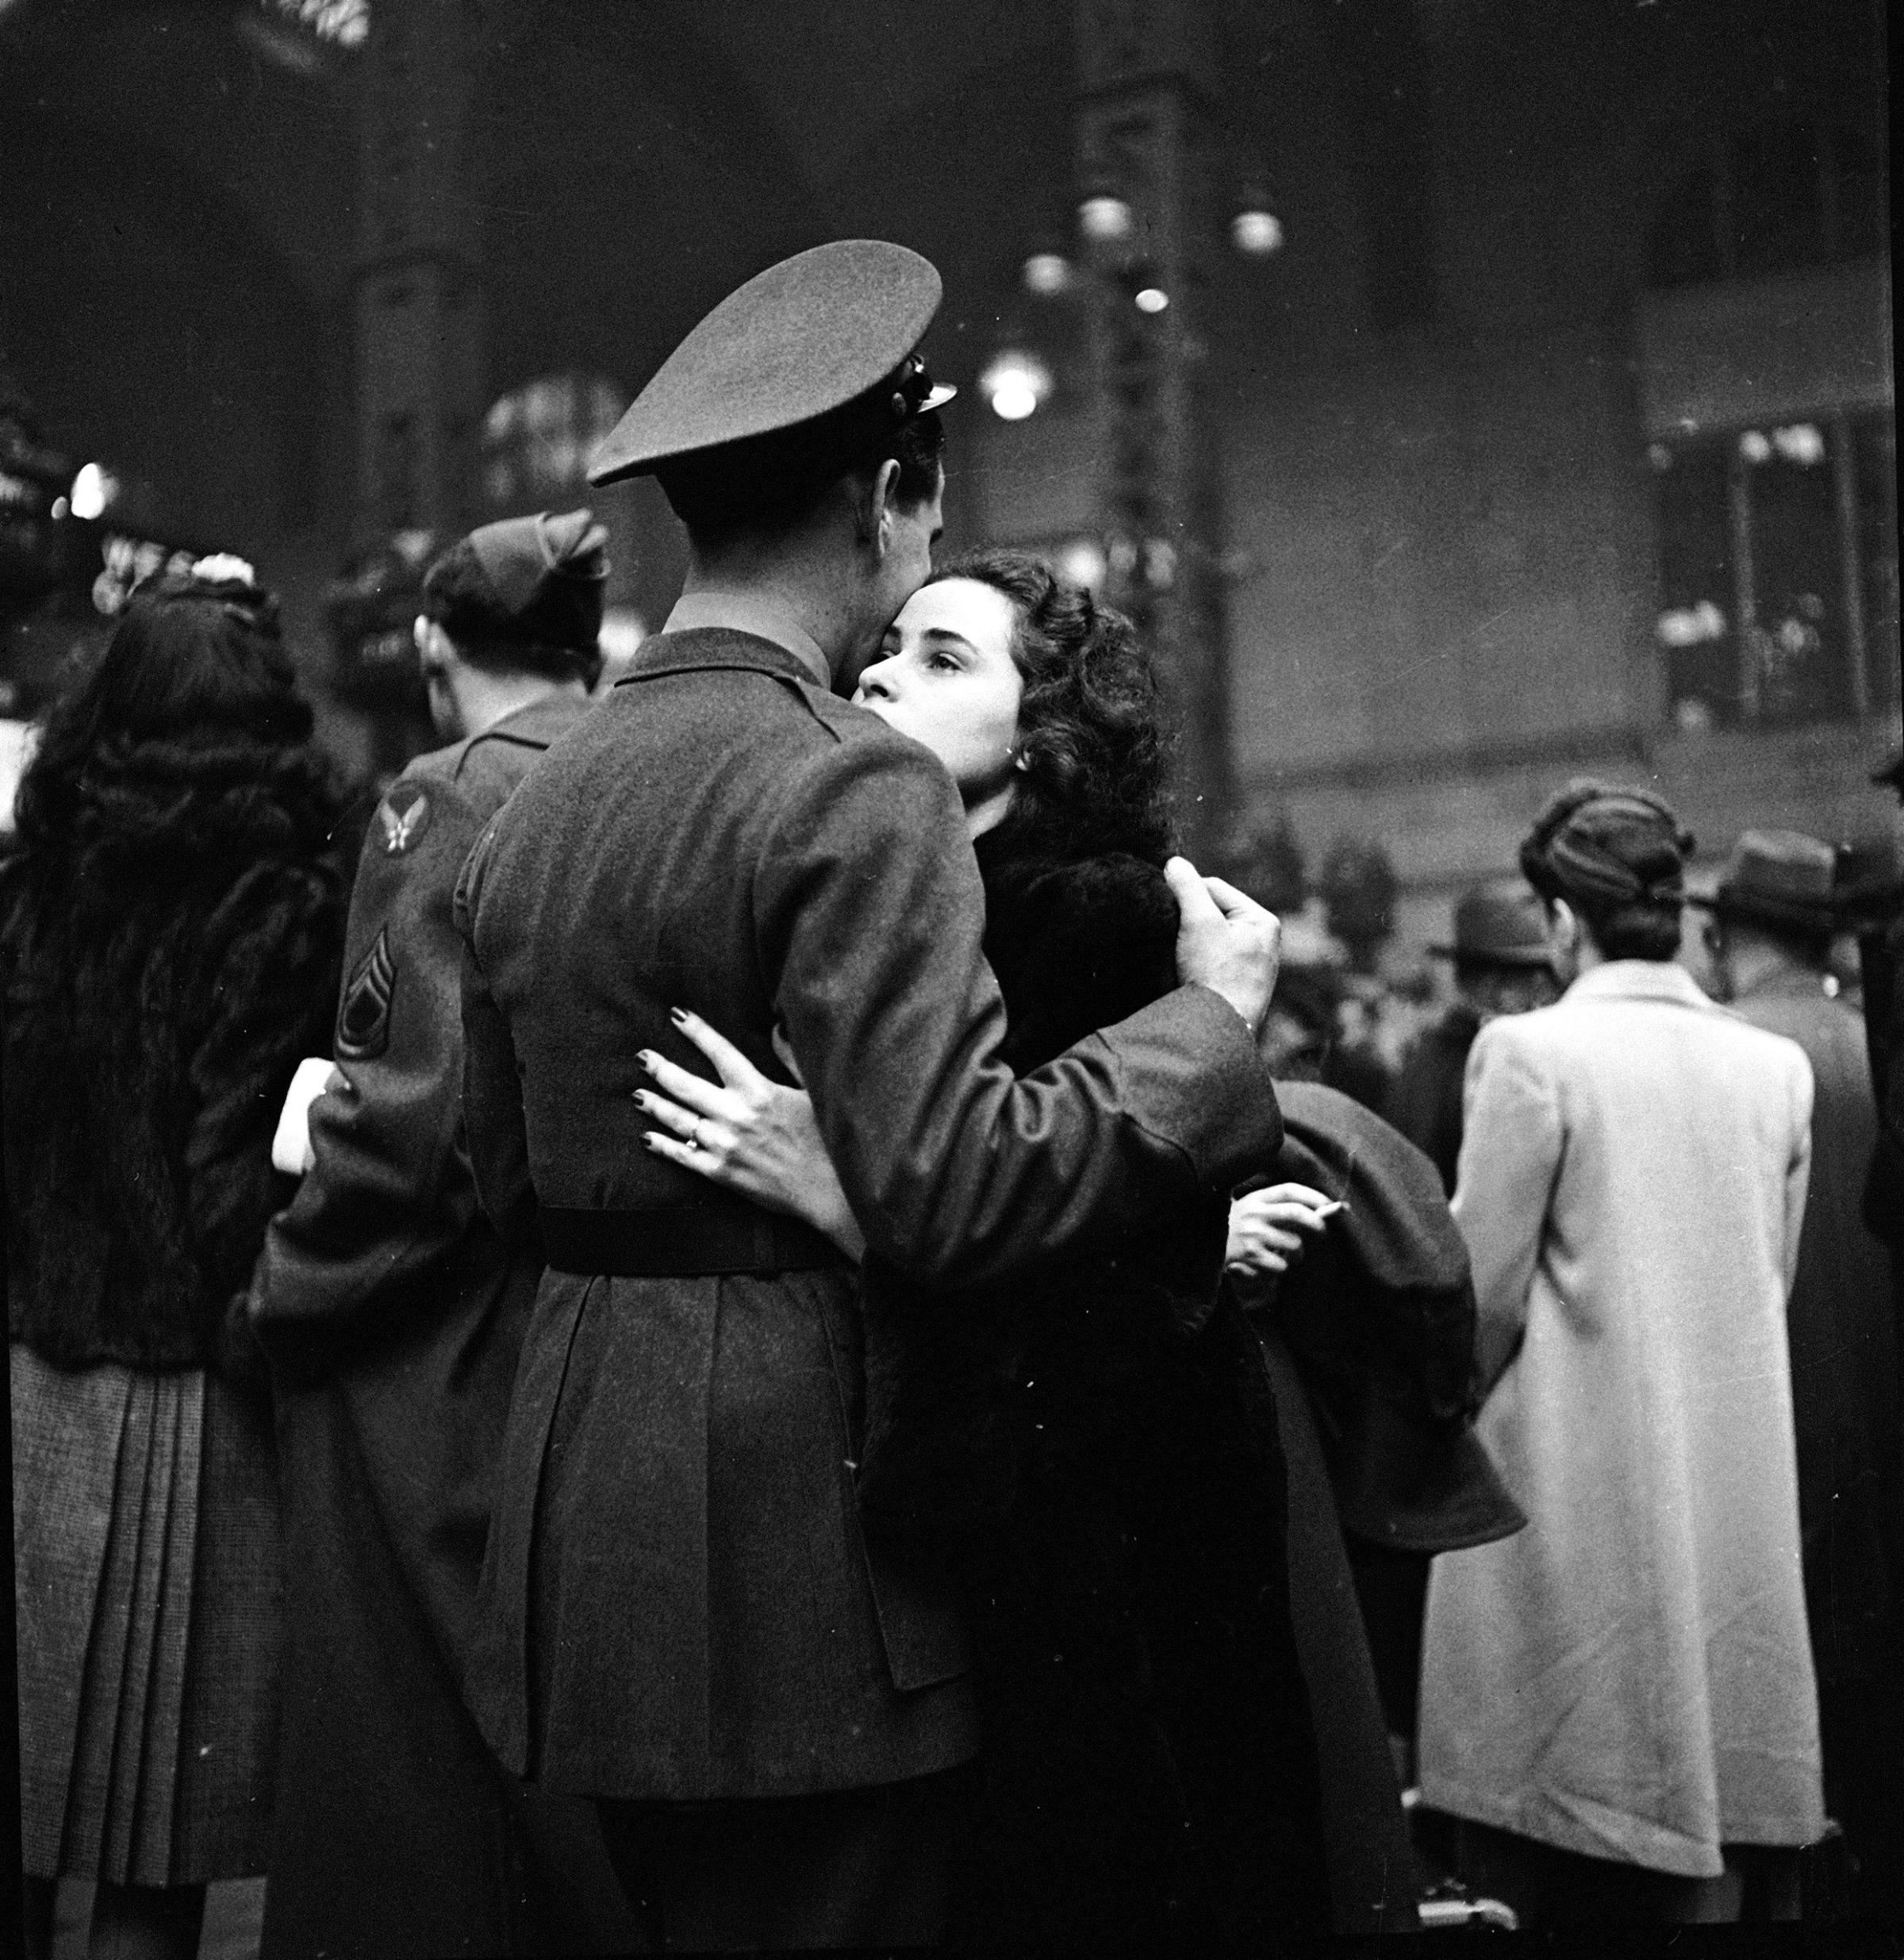 Soldier hugging his wife goodbye at Penn Station before he leaves for war, 1944.